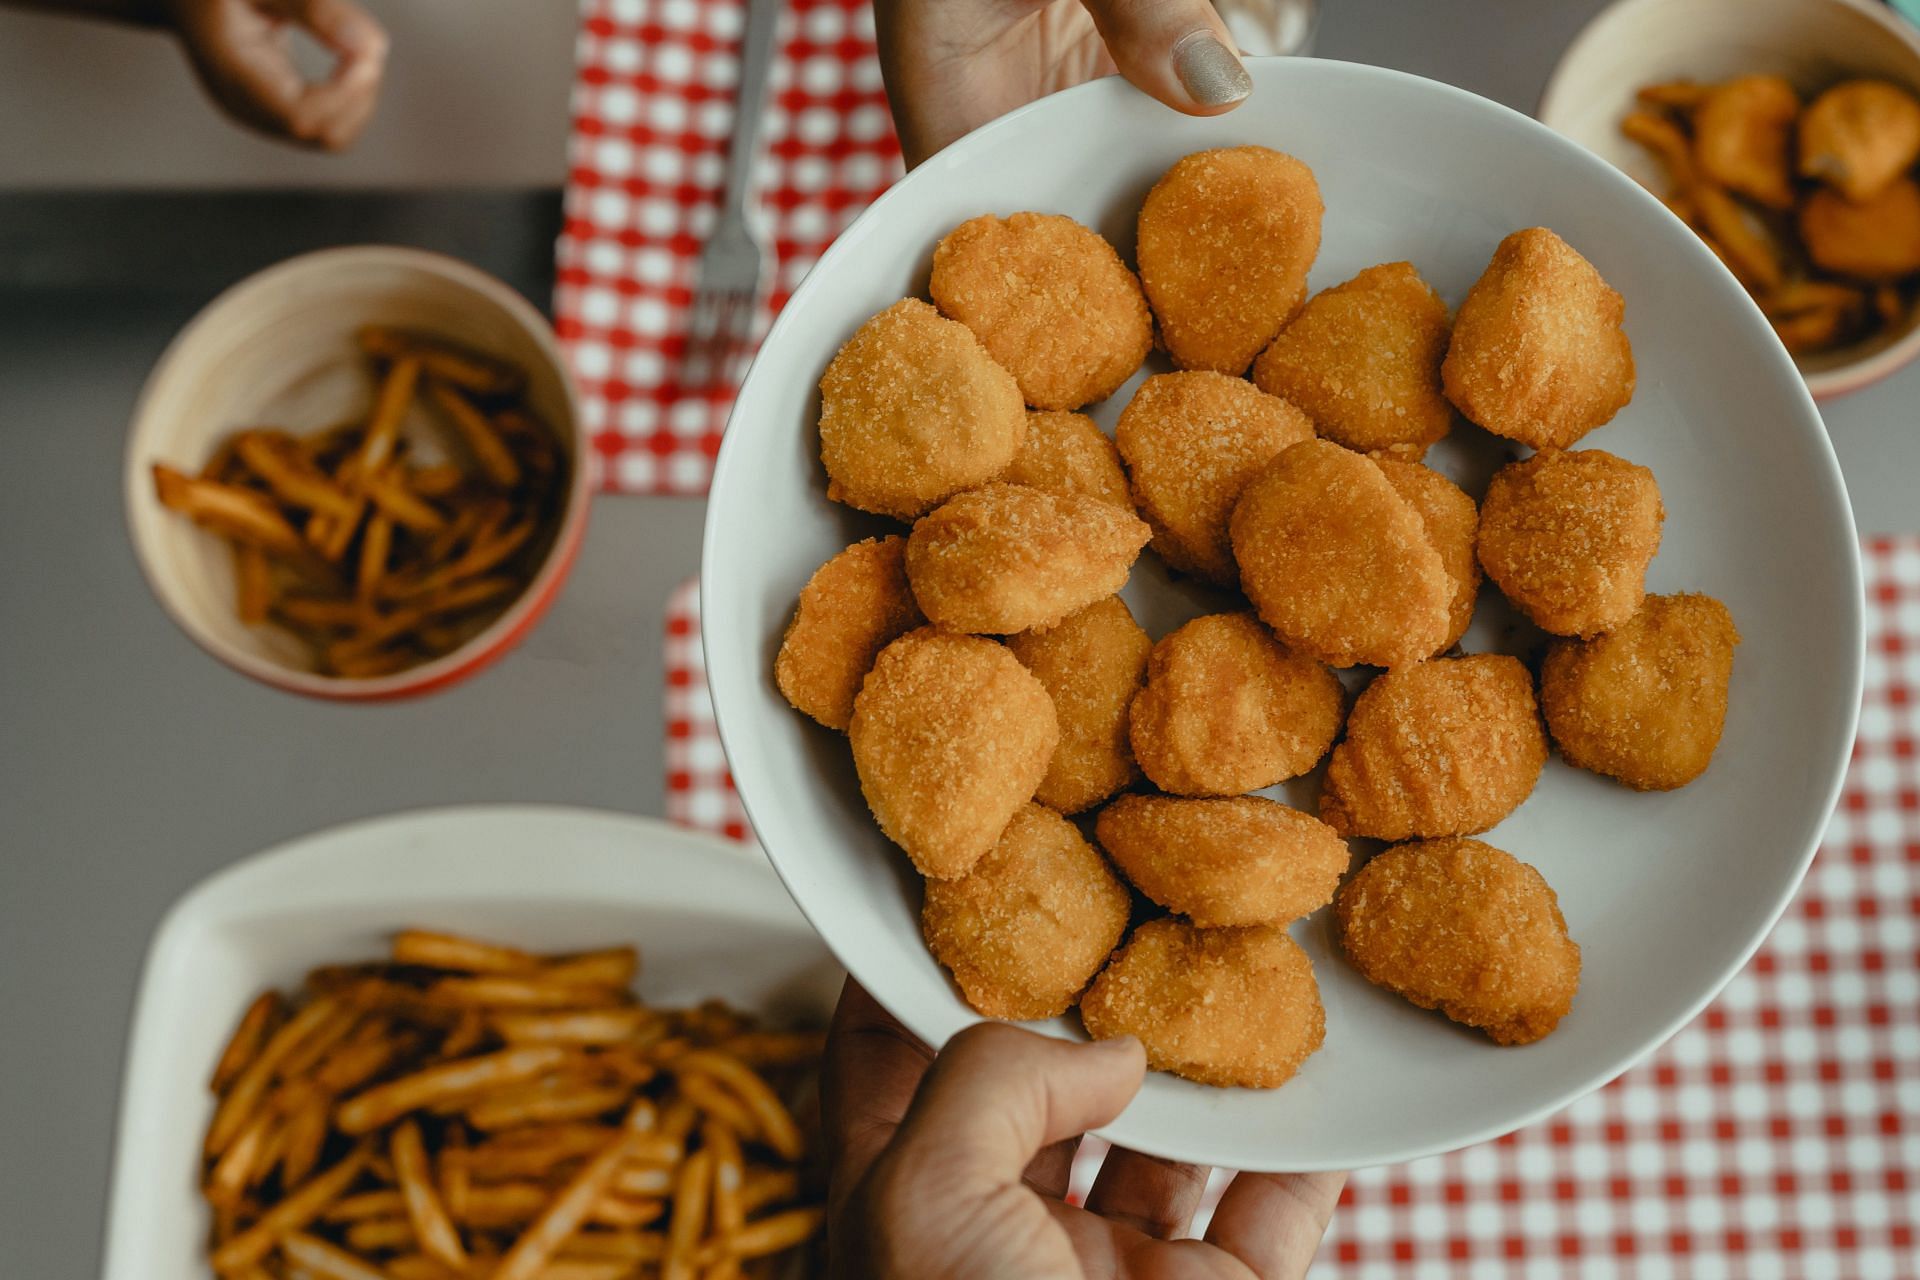 Chicken nuggets are highly processed foods. (Image via Unsplash/Tyson)